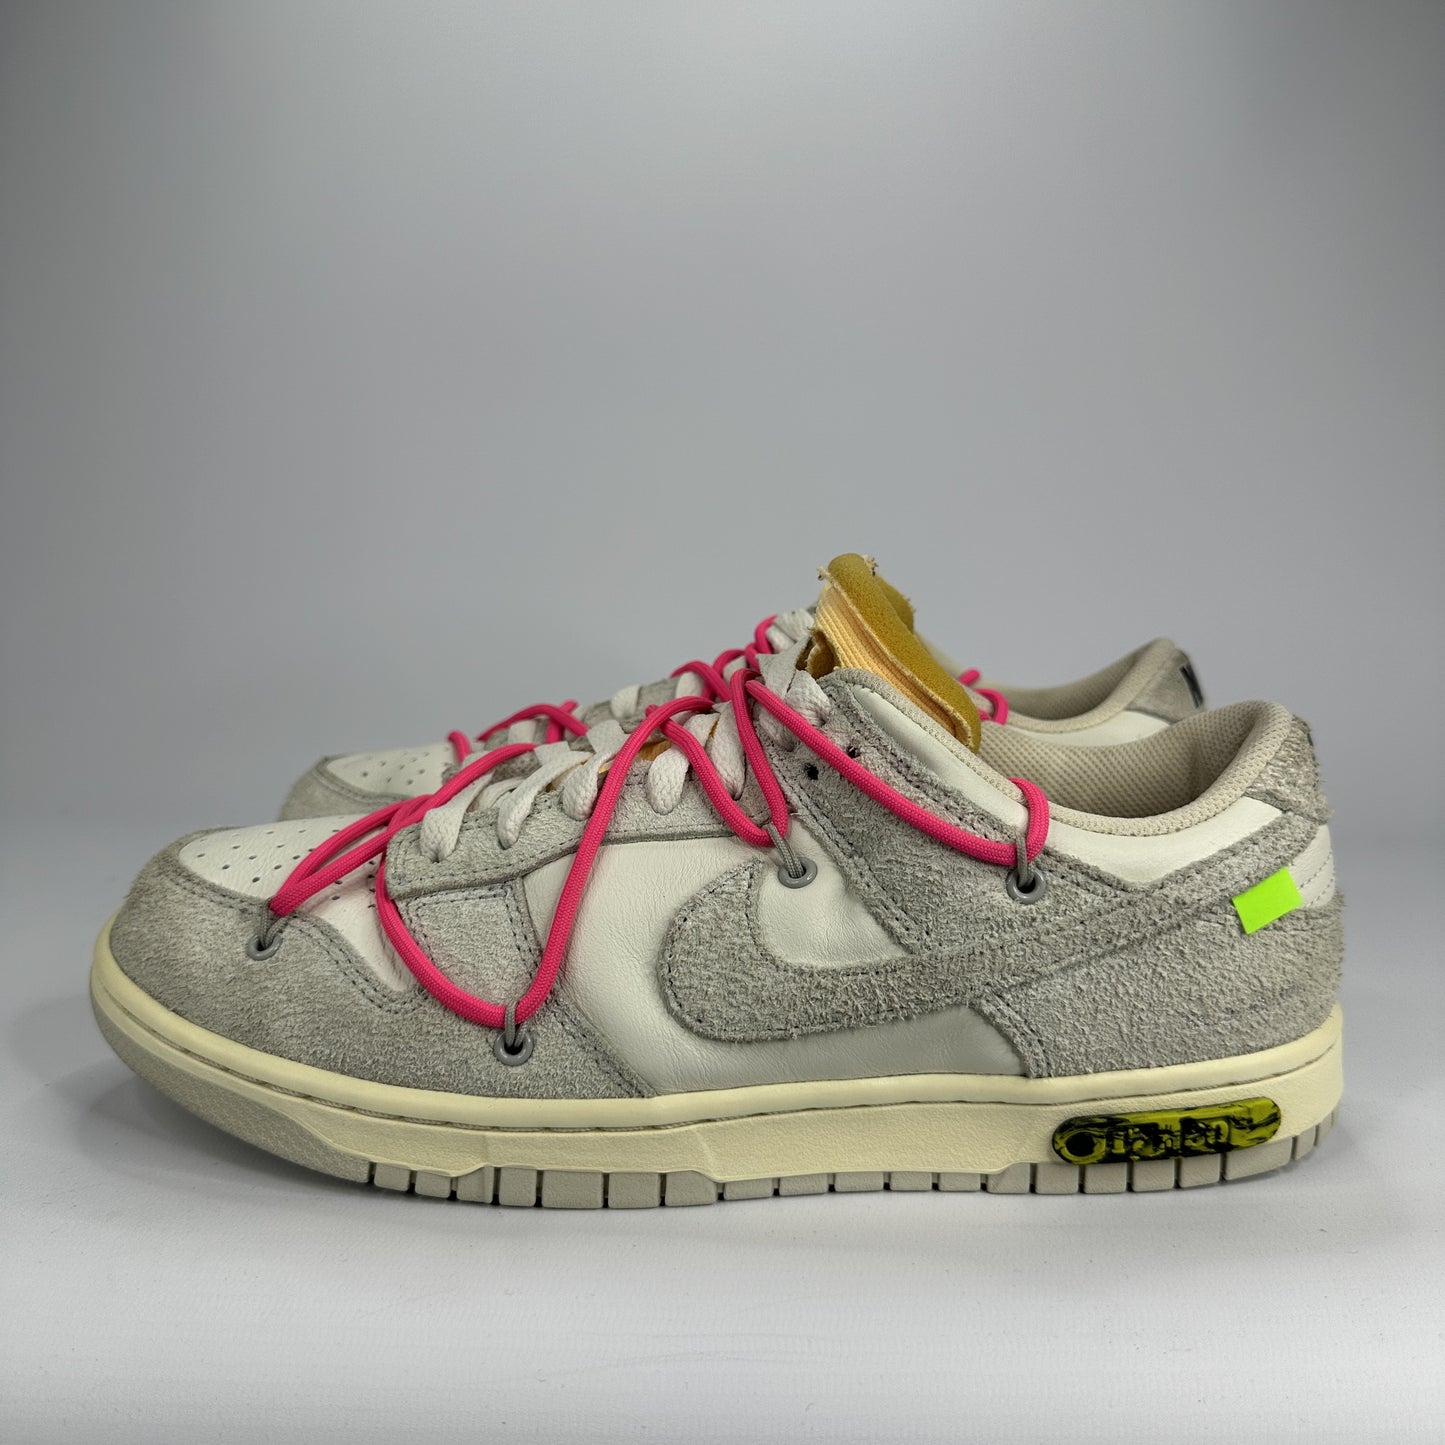 Off-White x Nike Dunk Low 'Lot 17 of 50' UK8.5**